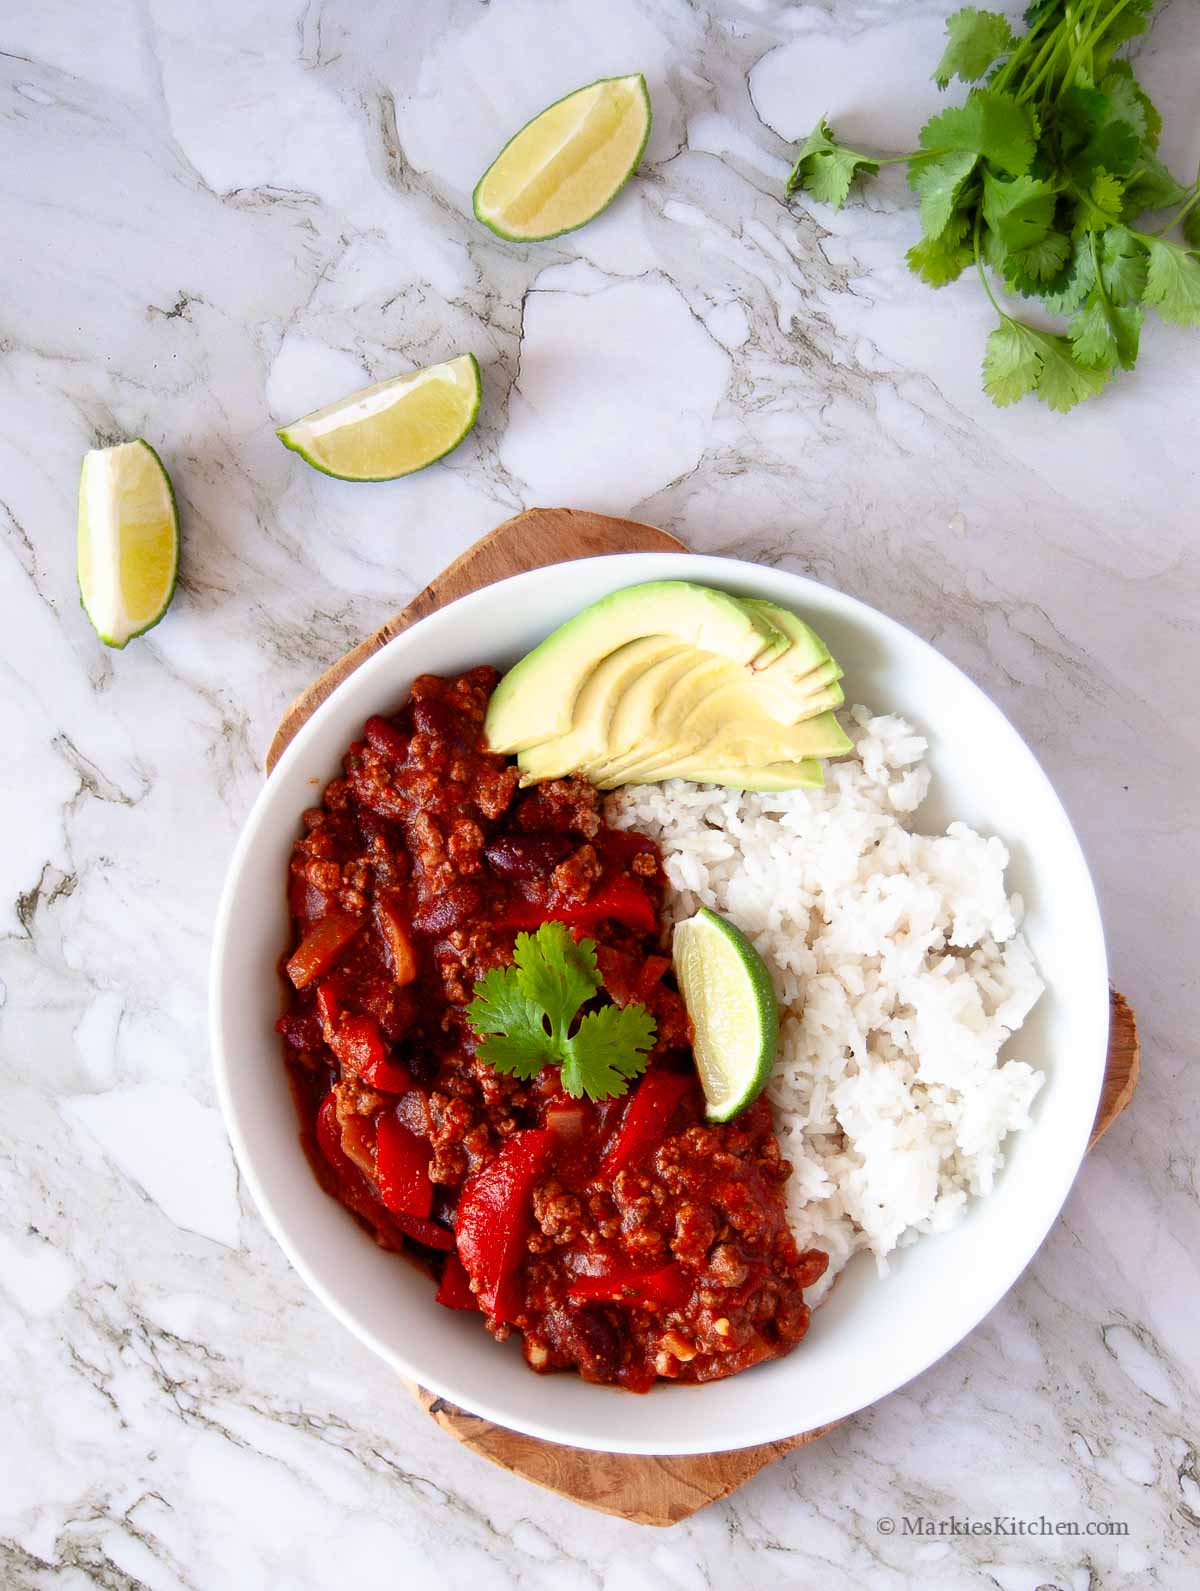 A top down photo of a plate of chili con carne with white rice, sliced avocado, a wedge of lime and a coriander leaf. There are three lime wedges and a bunch of fresh coriander next to the plate.